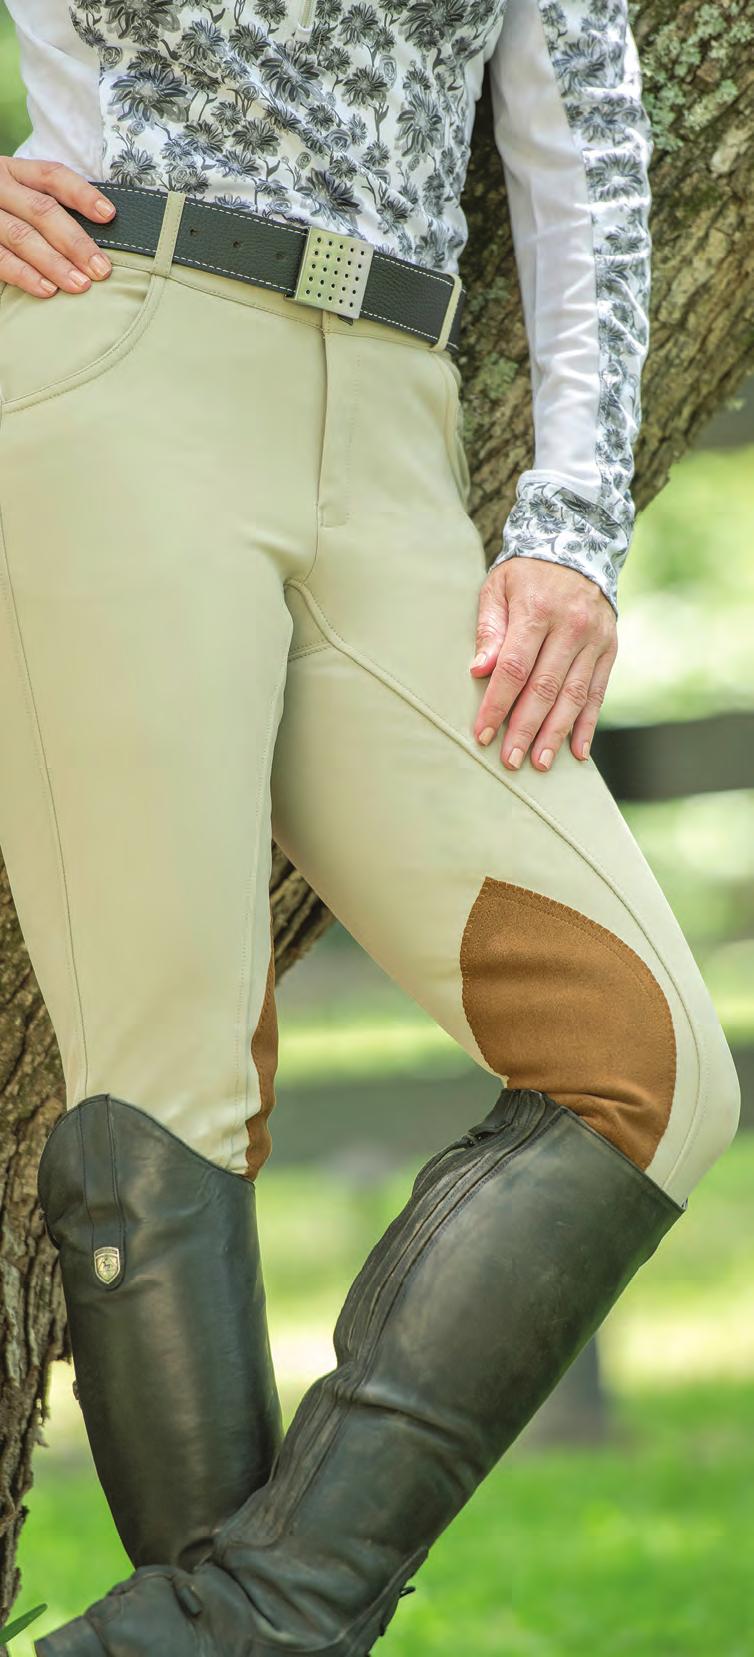 PIPPA KNEE PATCH BREECH FITS Pippa Knee Patch Breech is the perfect combination of beauty and functionality- this is the breech you ve been looking for in and out of the saddle.